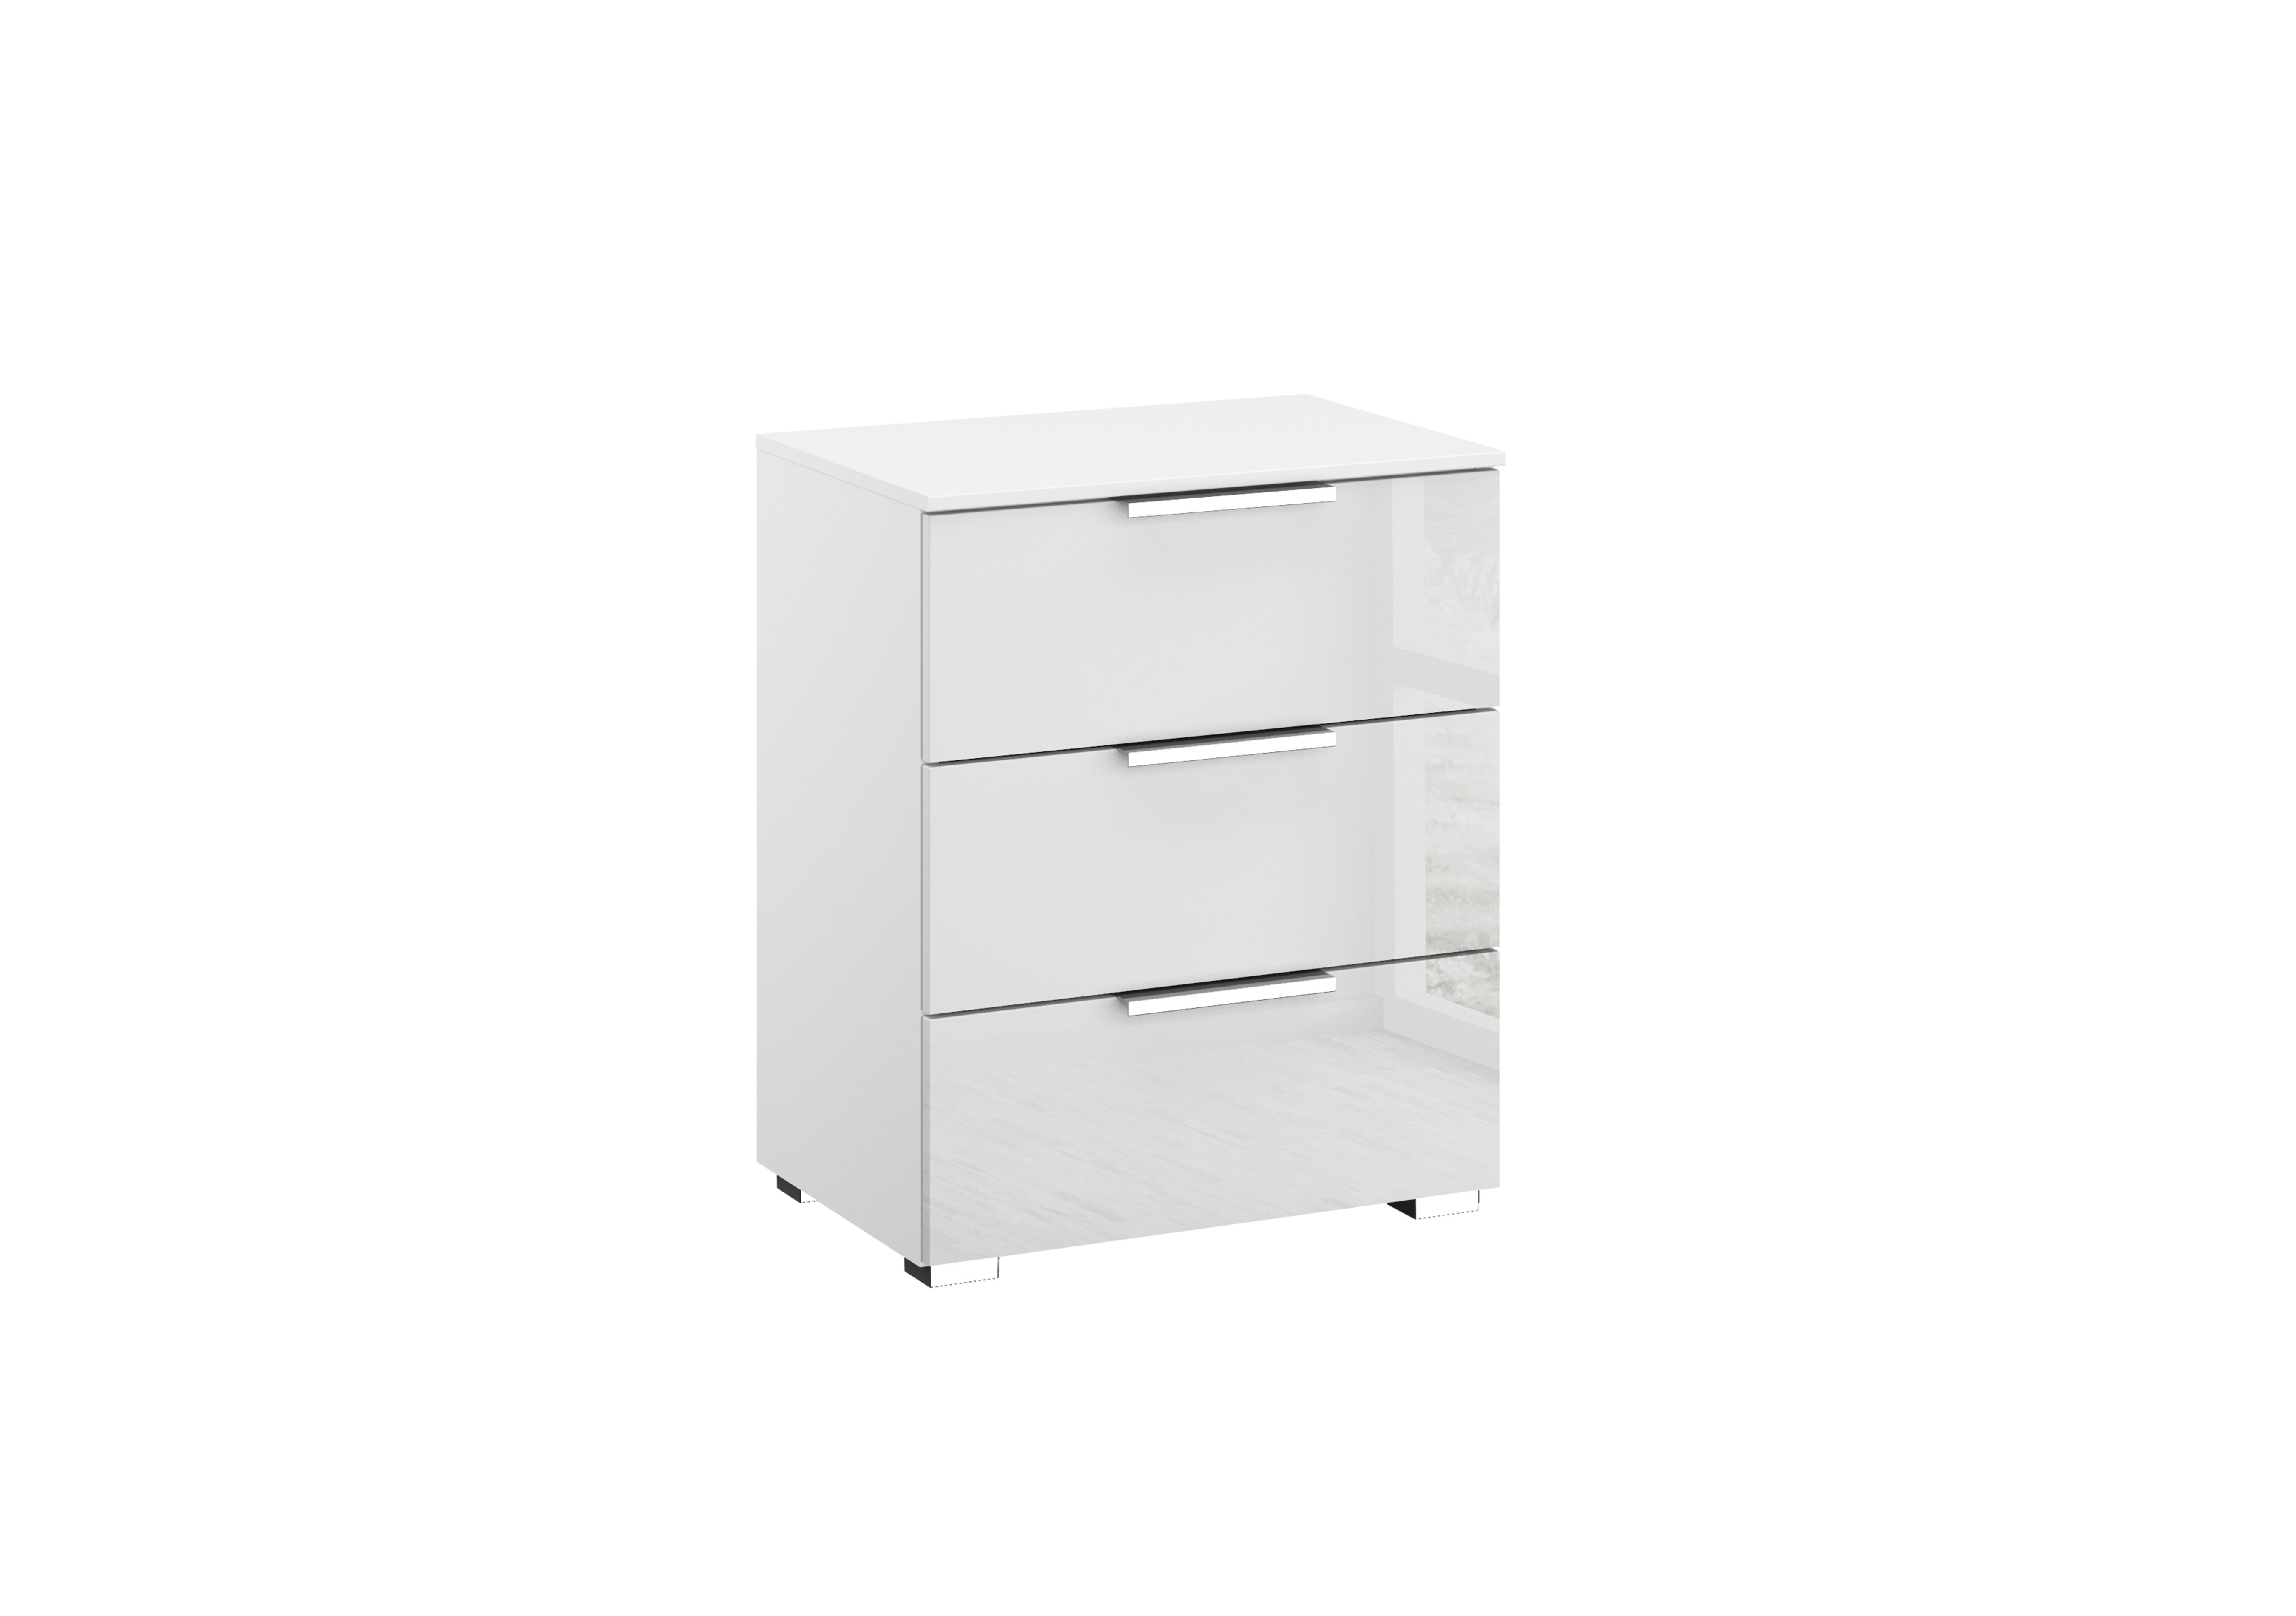 Perth 3 Drawer Bedside Chest in Z2600 White Carc/White Glass on Furniture Village